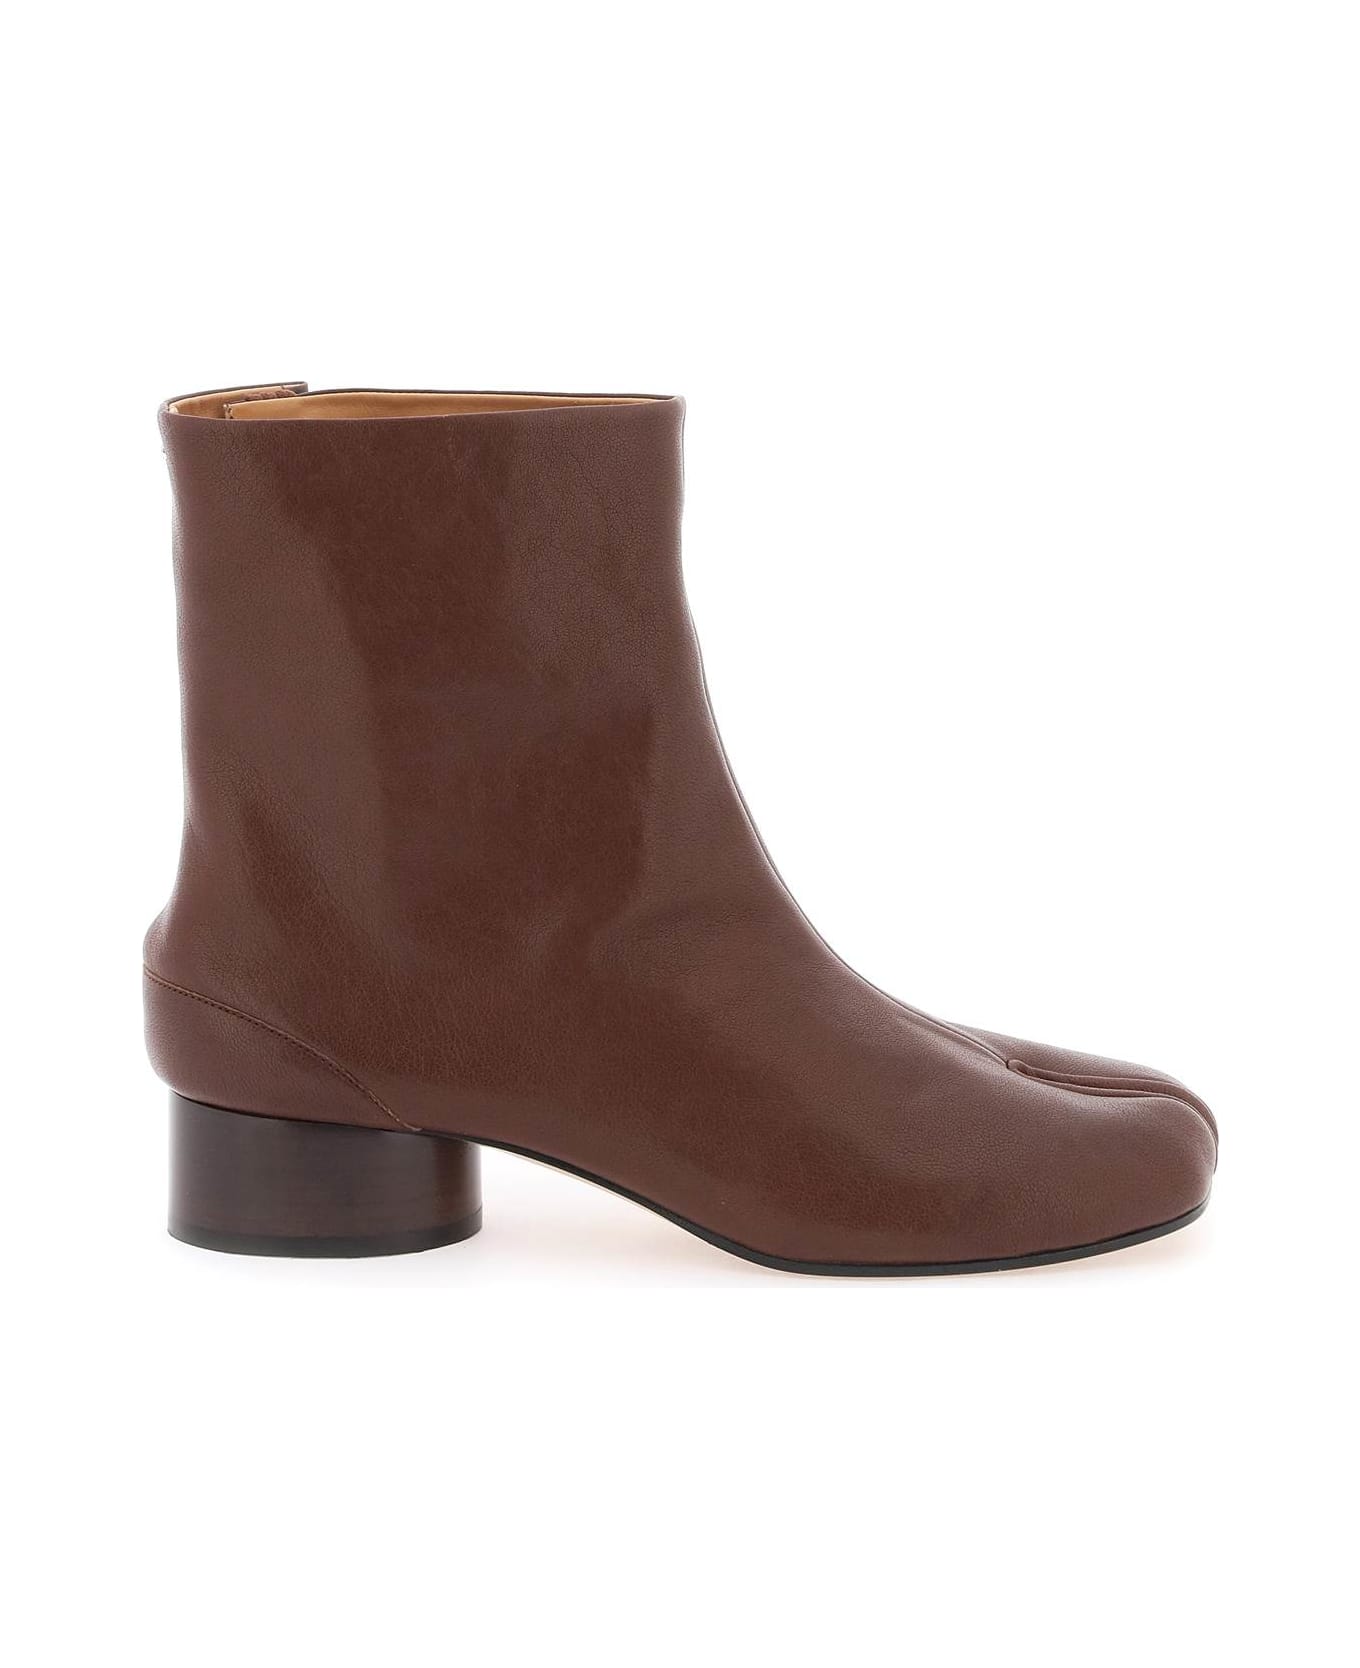 Maison Margiela Tabi Ankle Boots - MAJOR BROWN (Brown) ブーツ